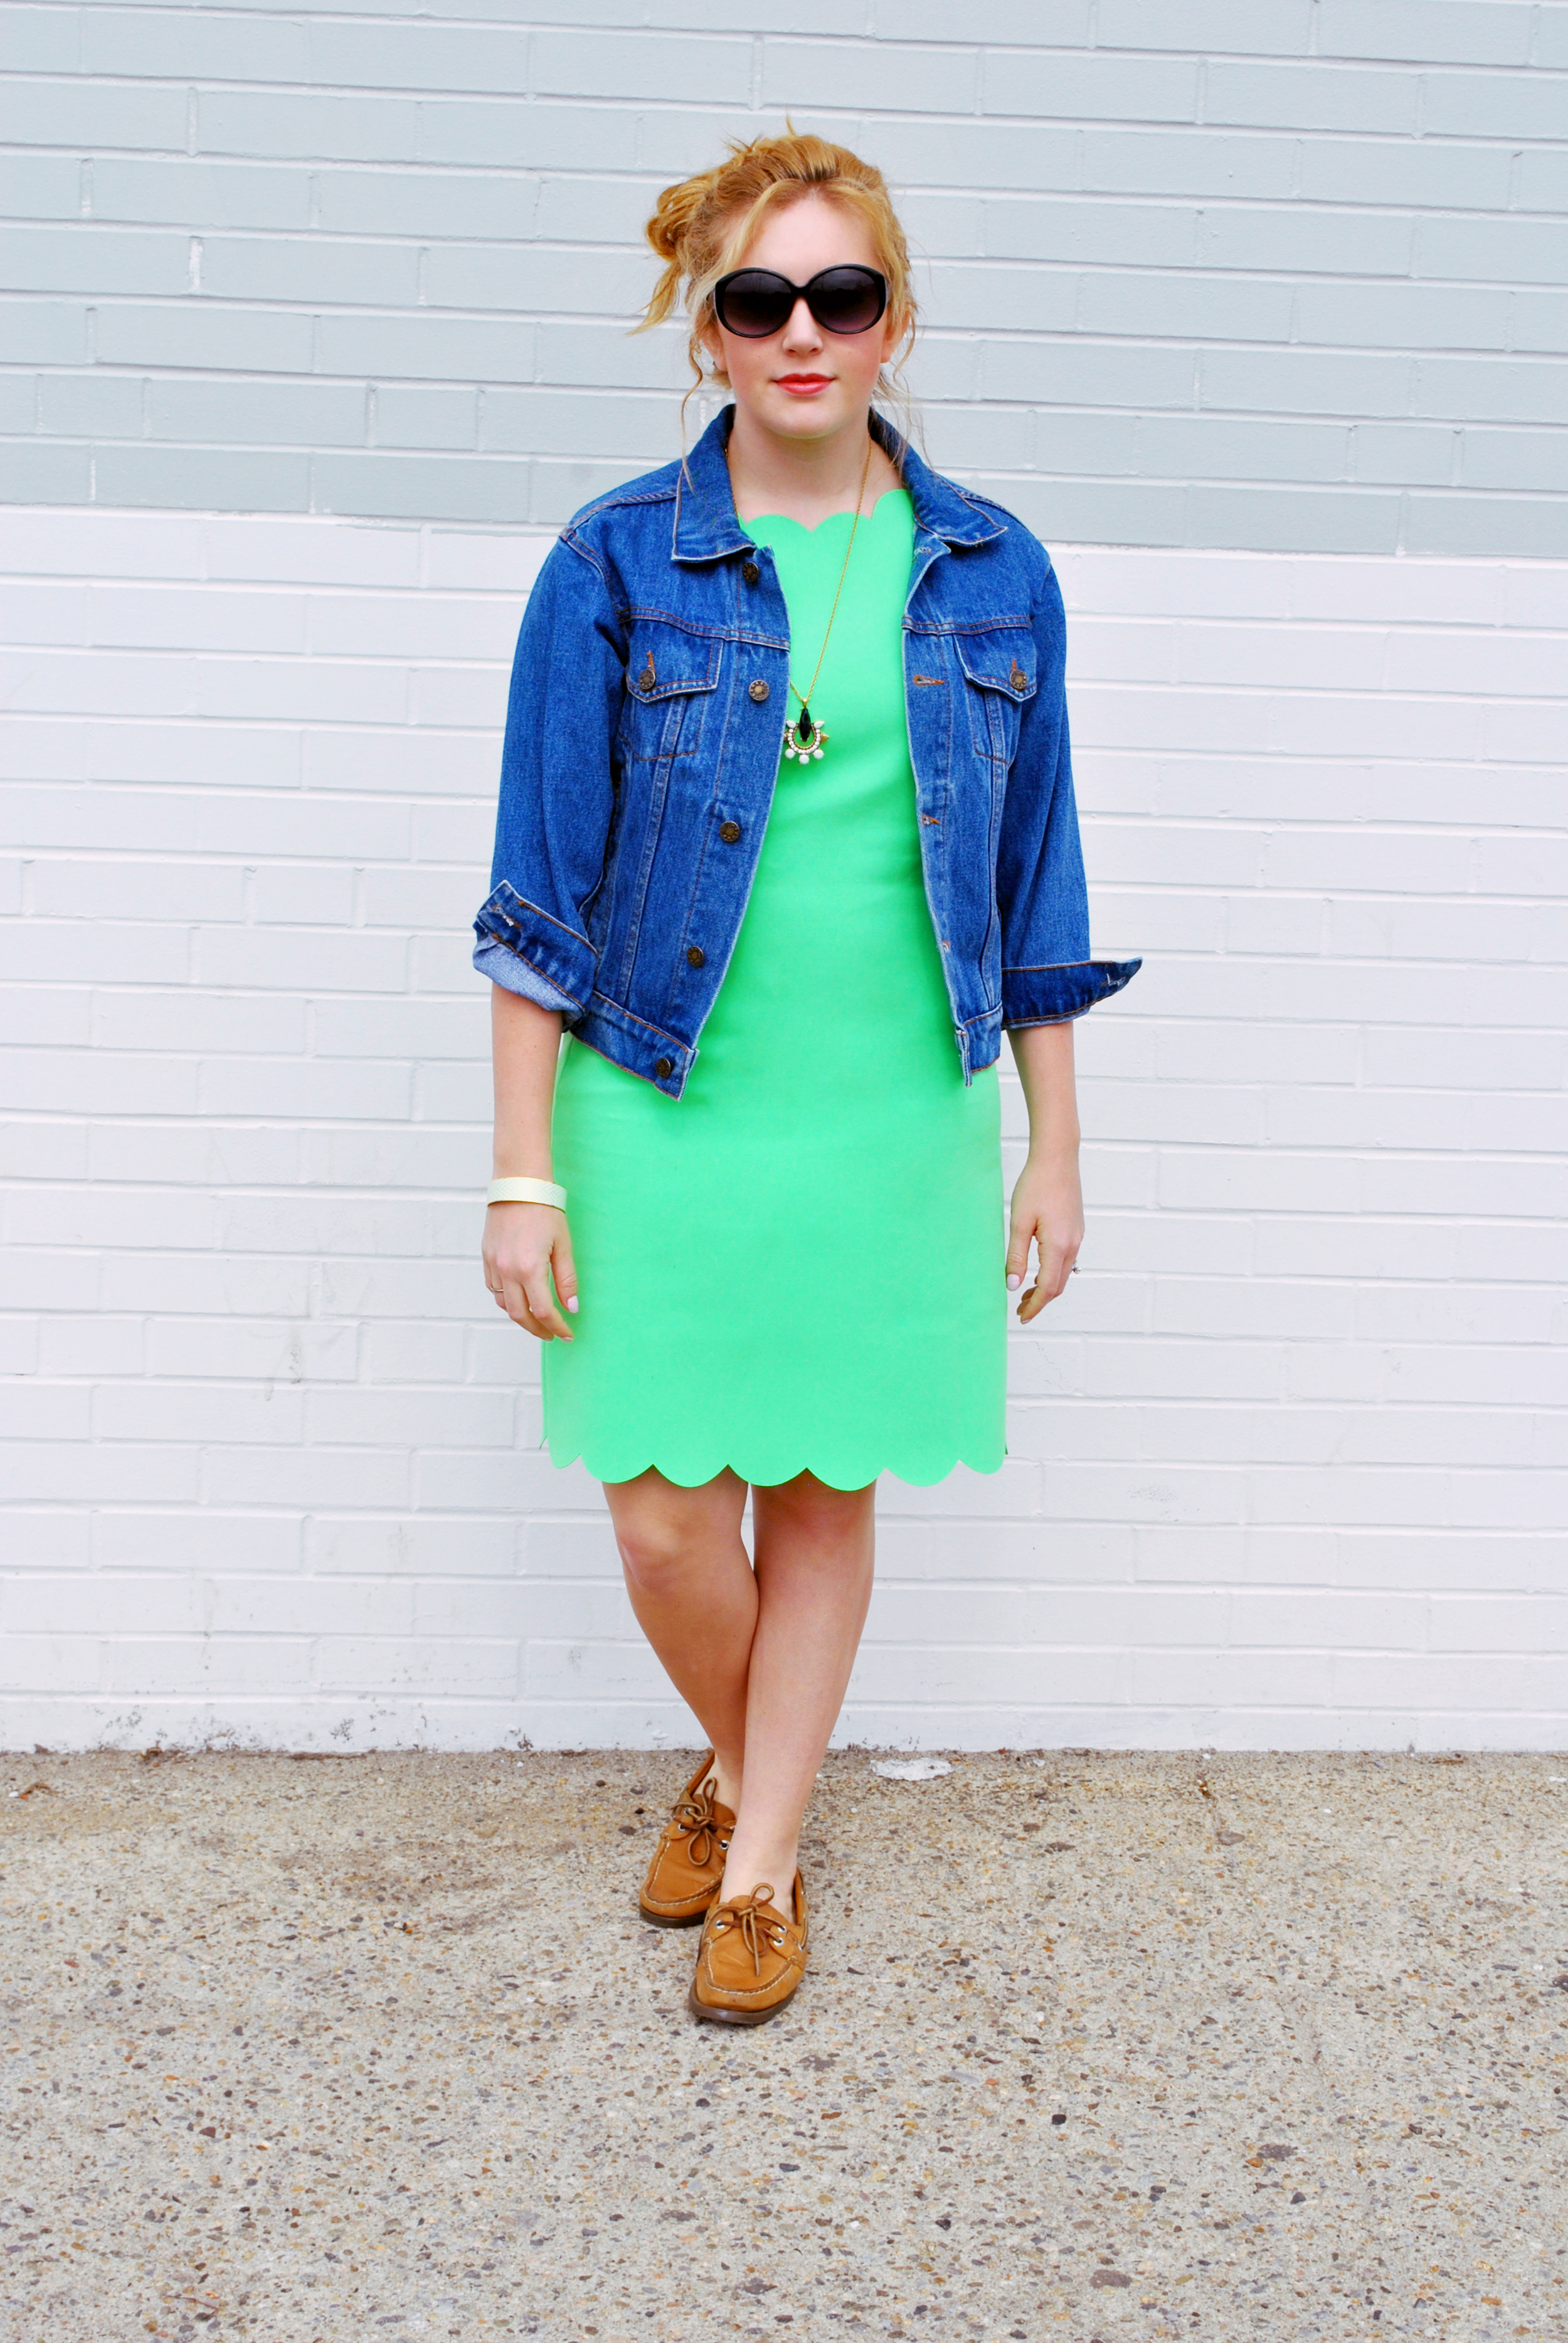 J.crew Factory Scallop Dress // green scallop dress // day to night outfit // preppy outfit // fashion blogger | thoughtfulwish